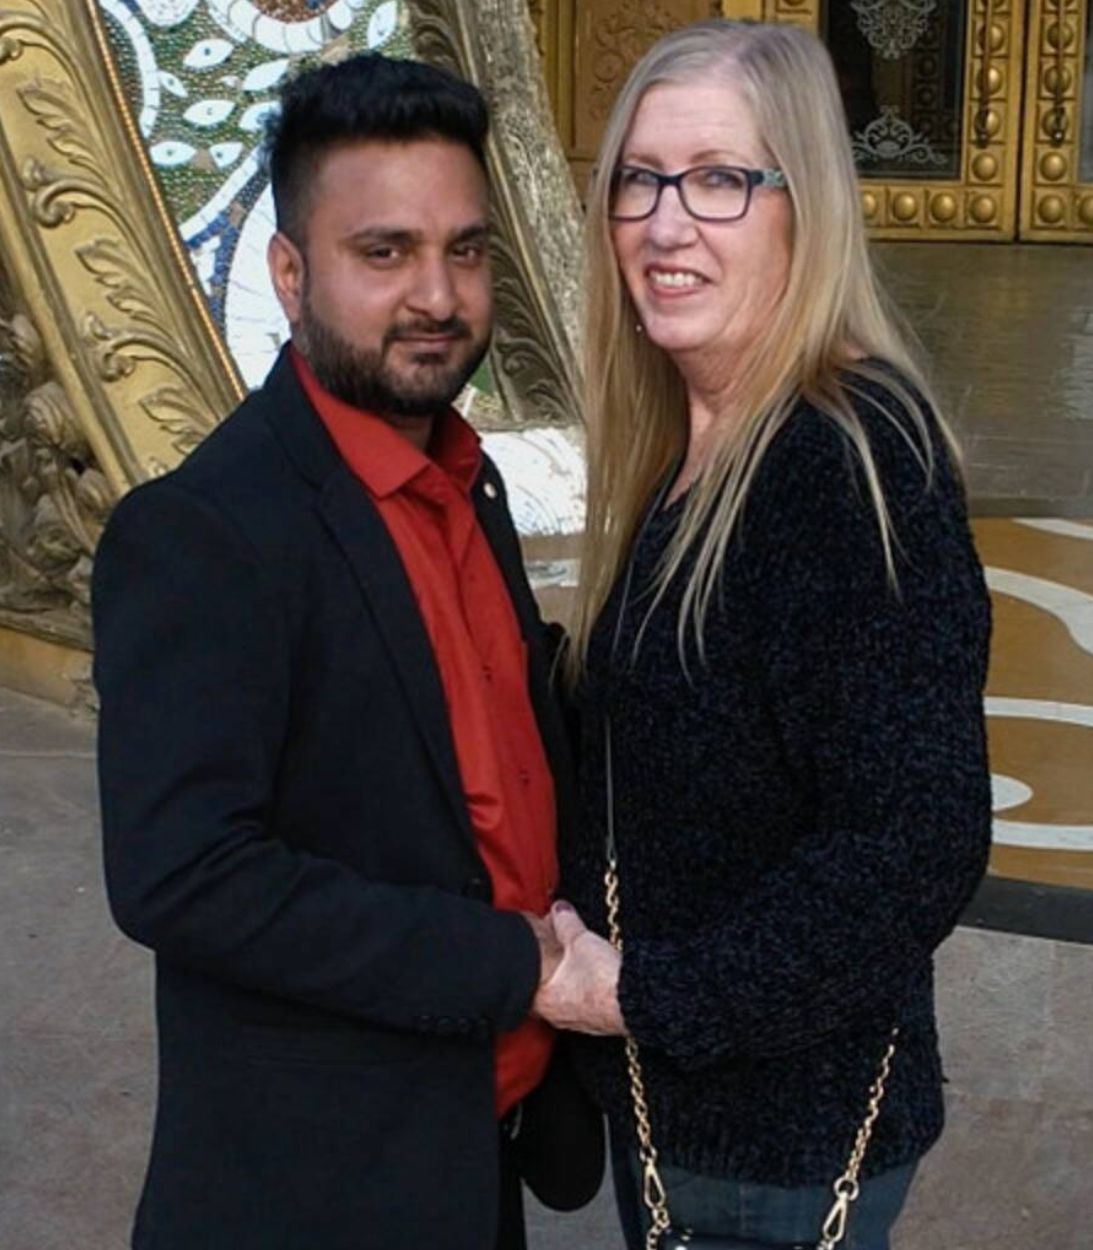 Sumit and Jenny: 90 Day Fiance